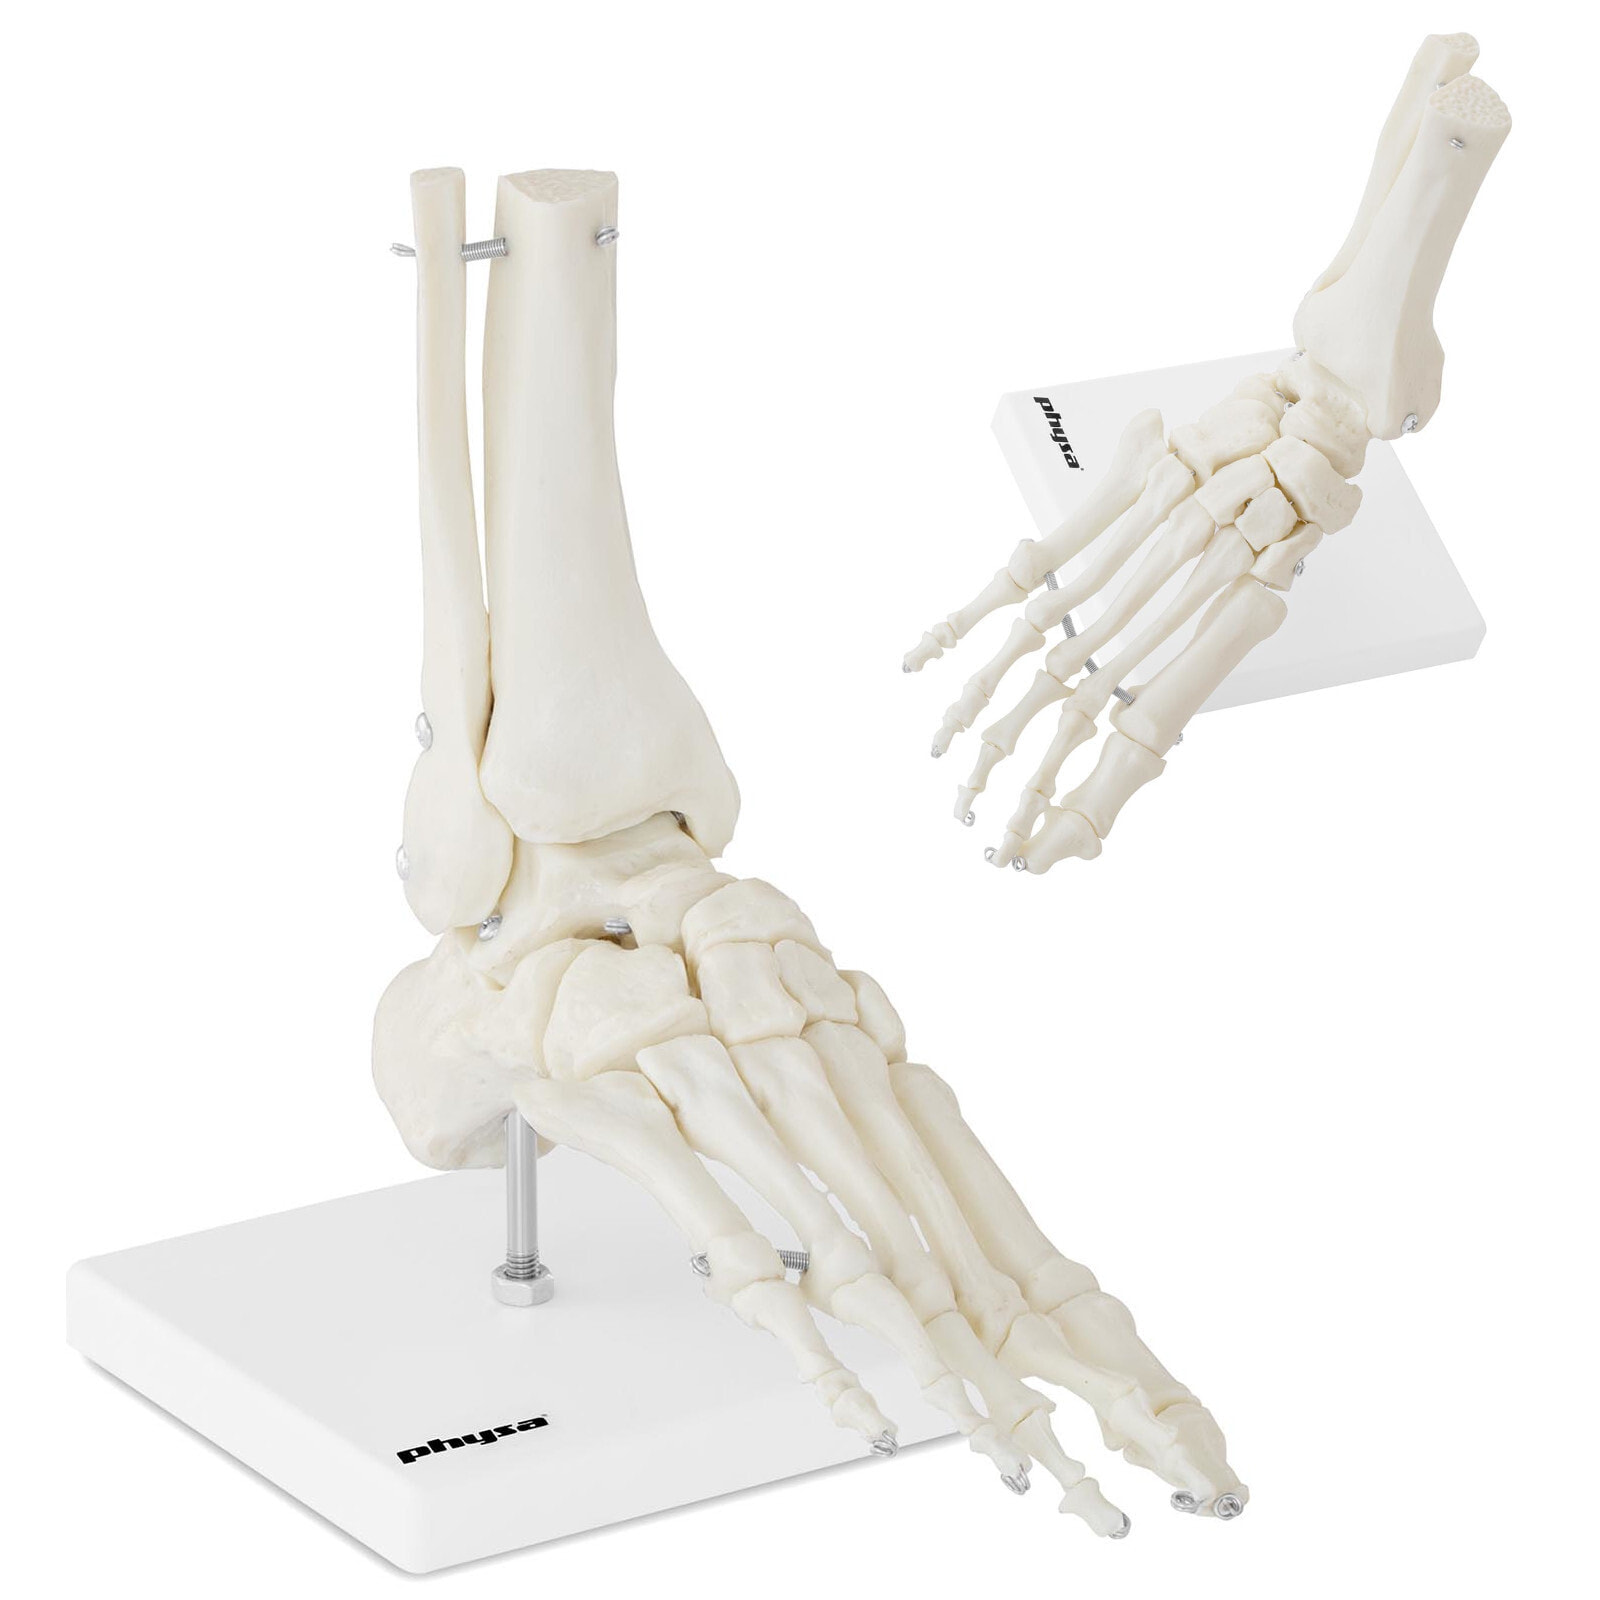 Anatomical model of the ankle joint, scale 1: 1